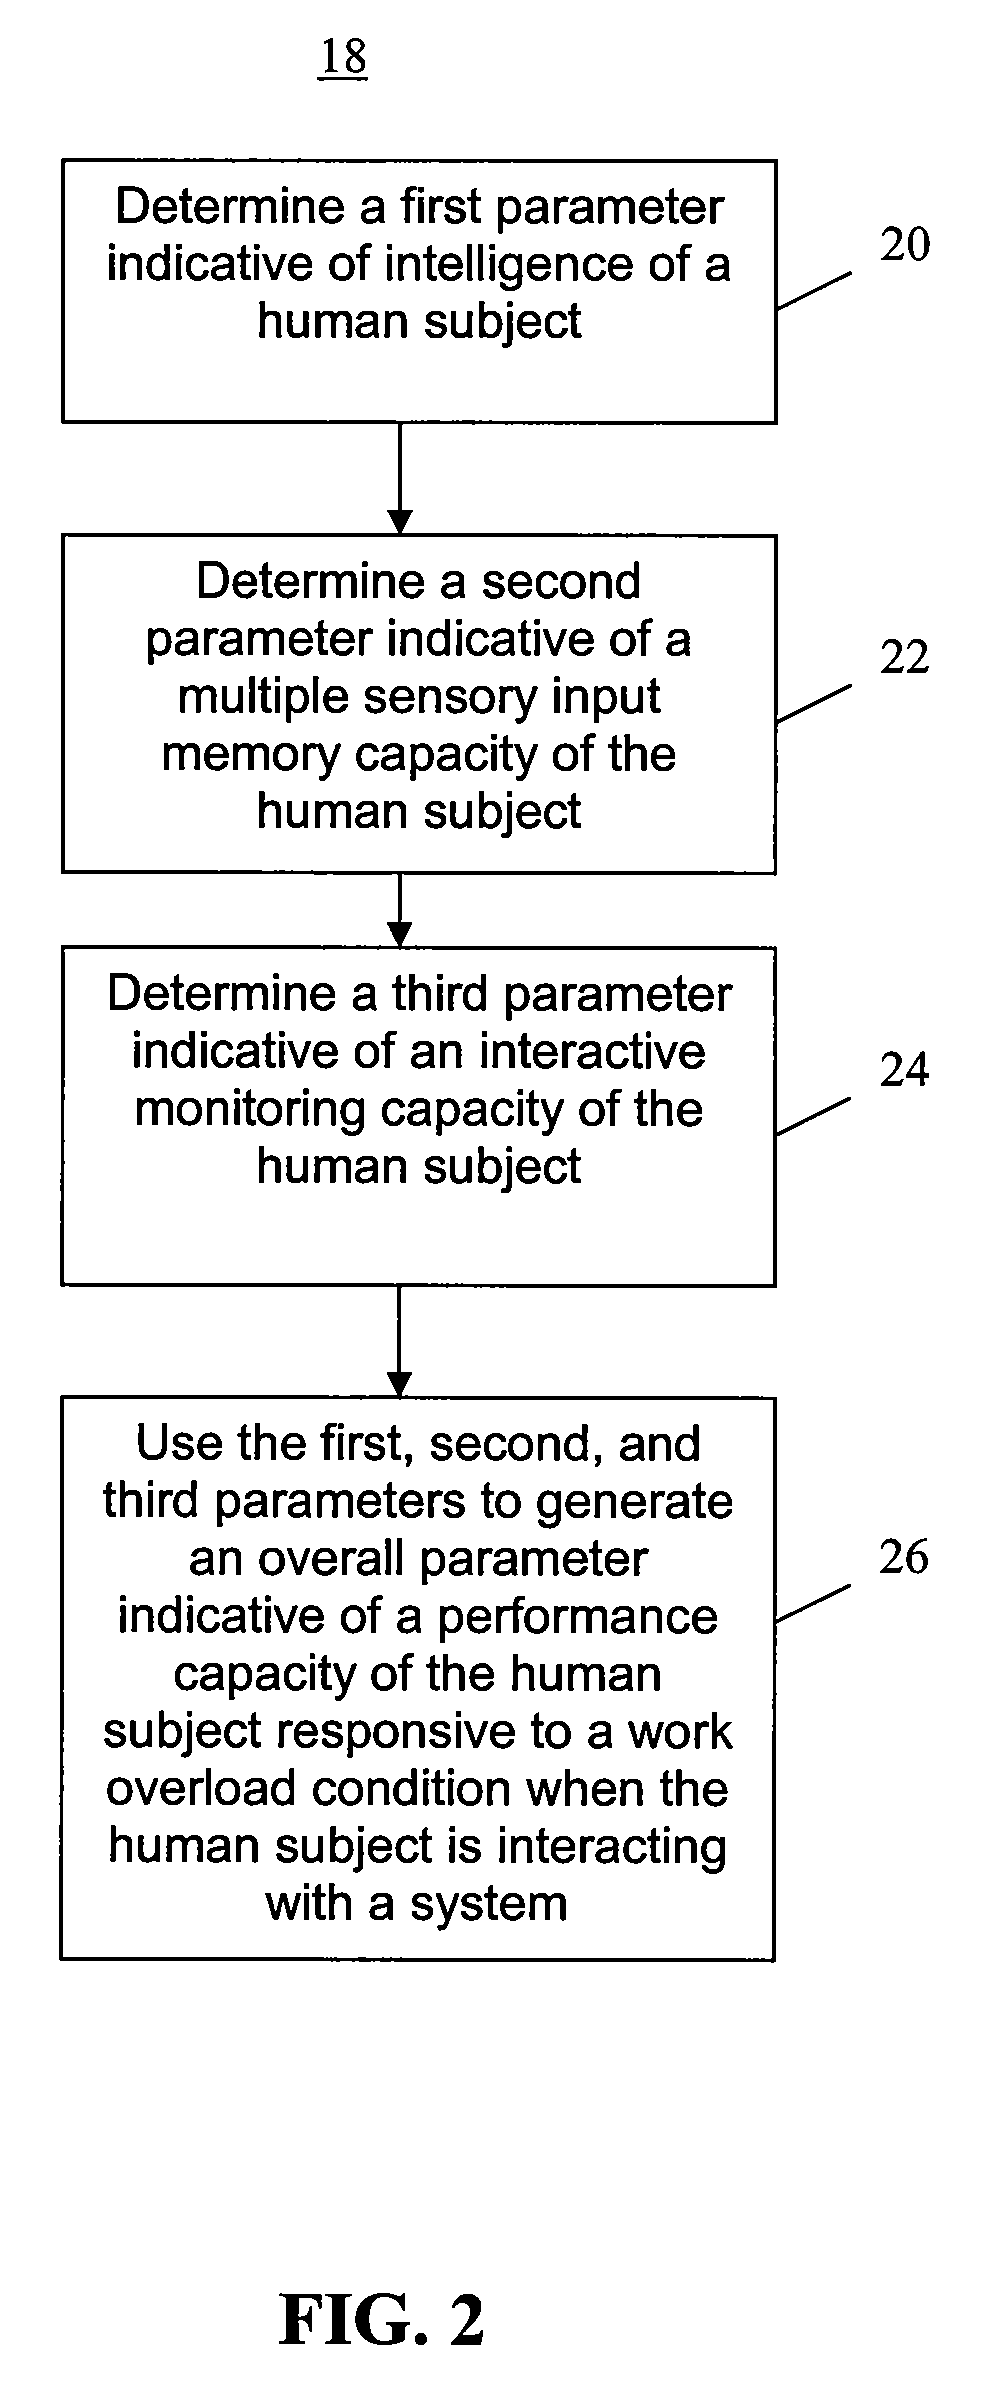 Design Of systems For Improved Human Interaction